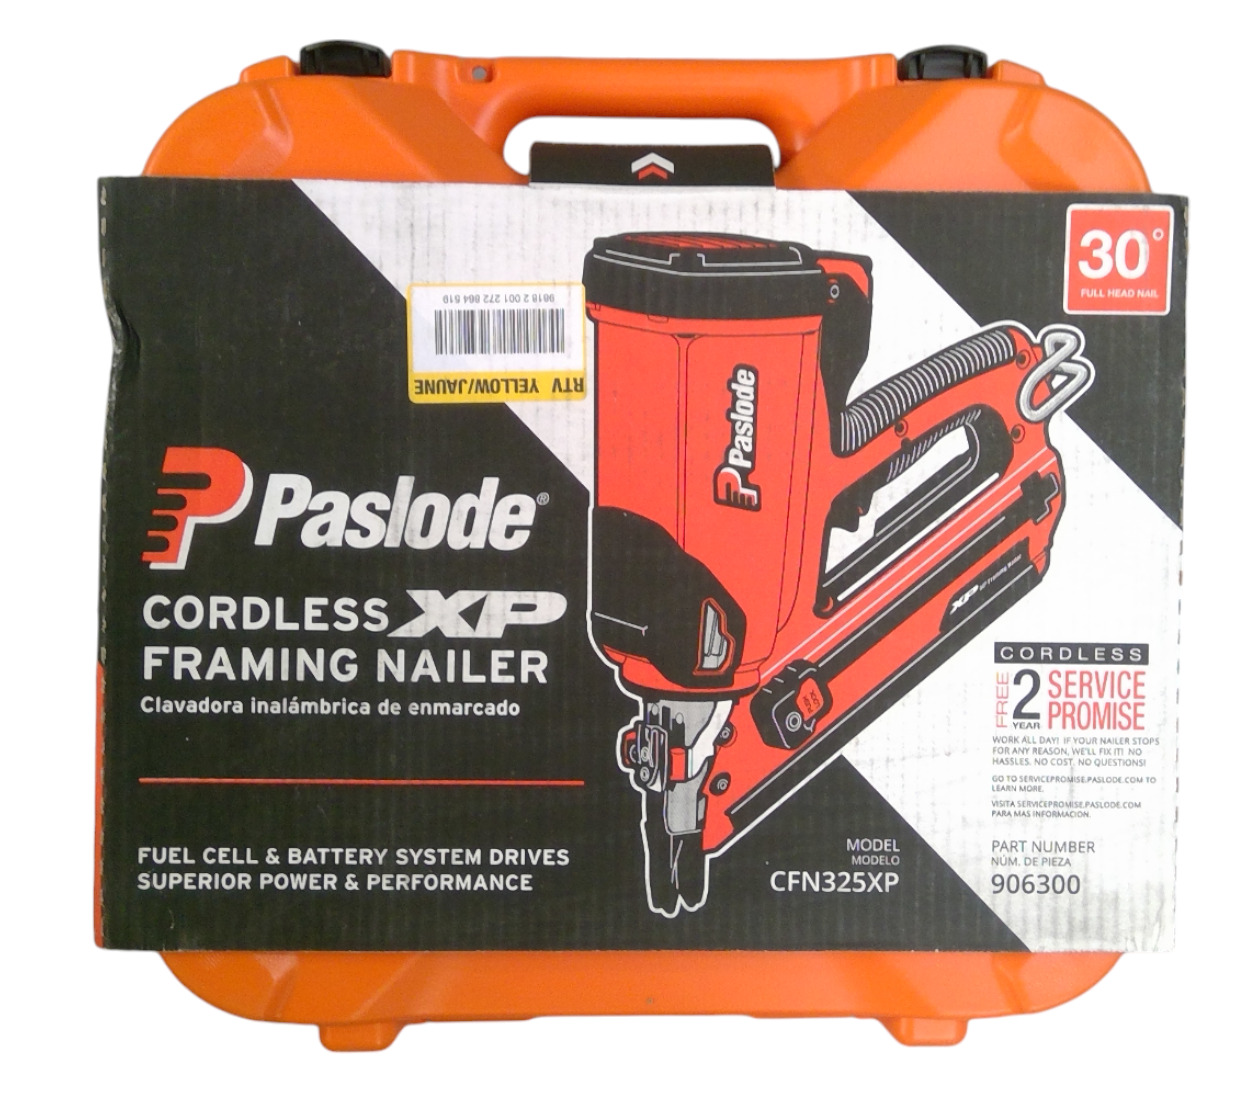 USED - Paslode CFN325XP 30° Paper-Tape Framing Nailer (TOOL ONLY)